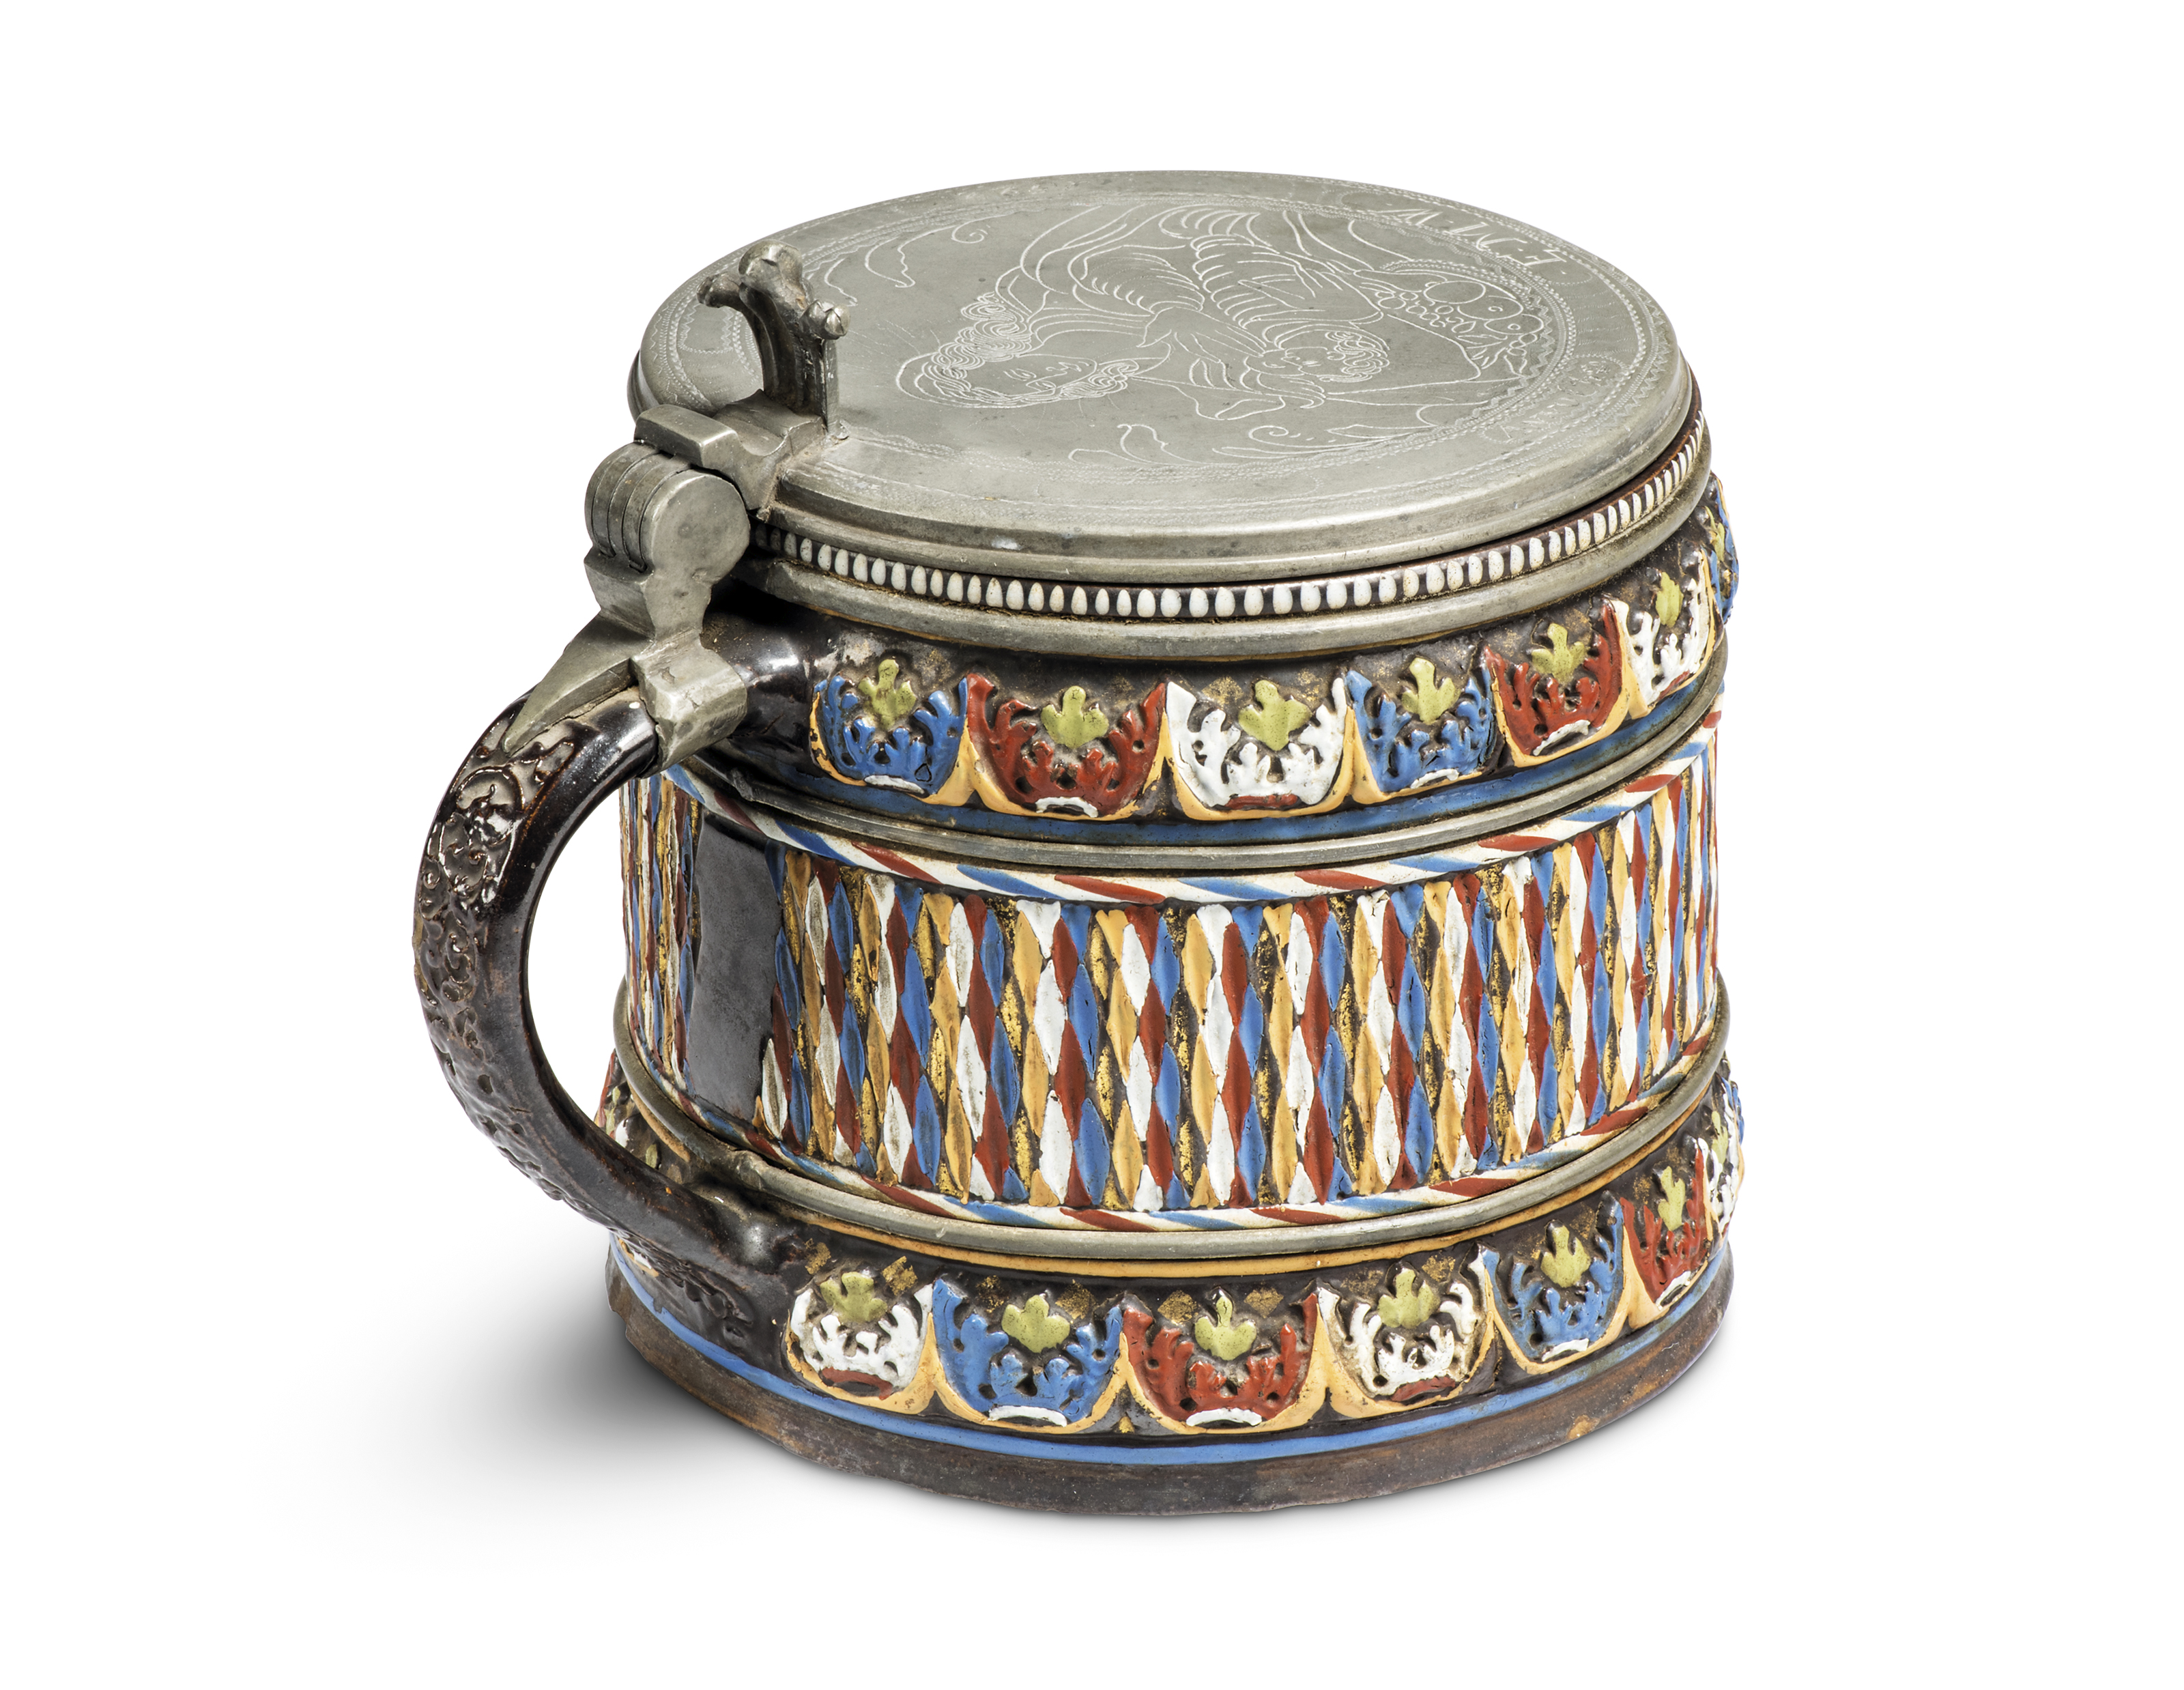 A pewter mounted German stoneware bierkrug, probably Creussen, probably 17th century, with a broa... - Image 2 of 5